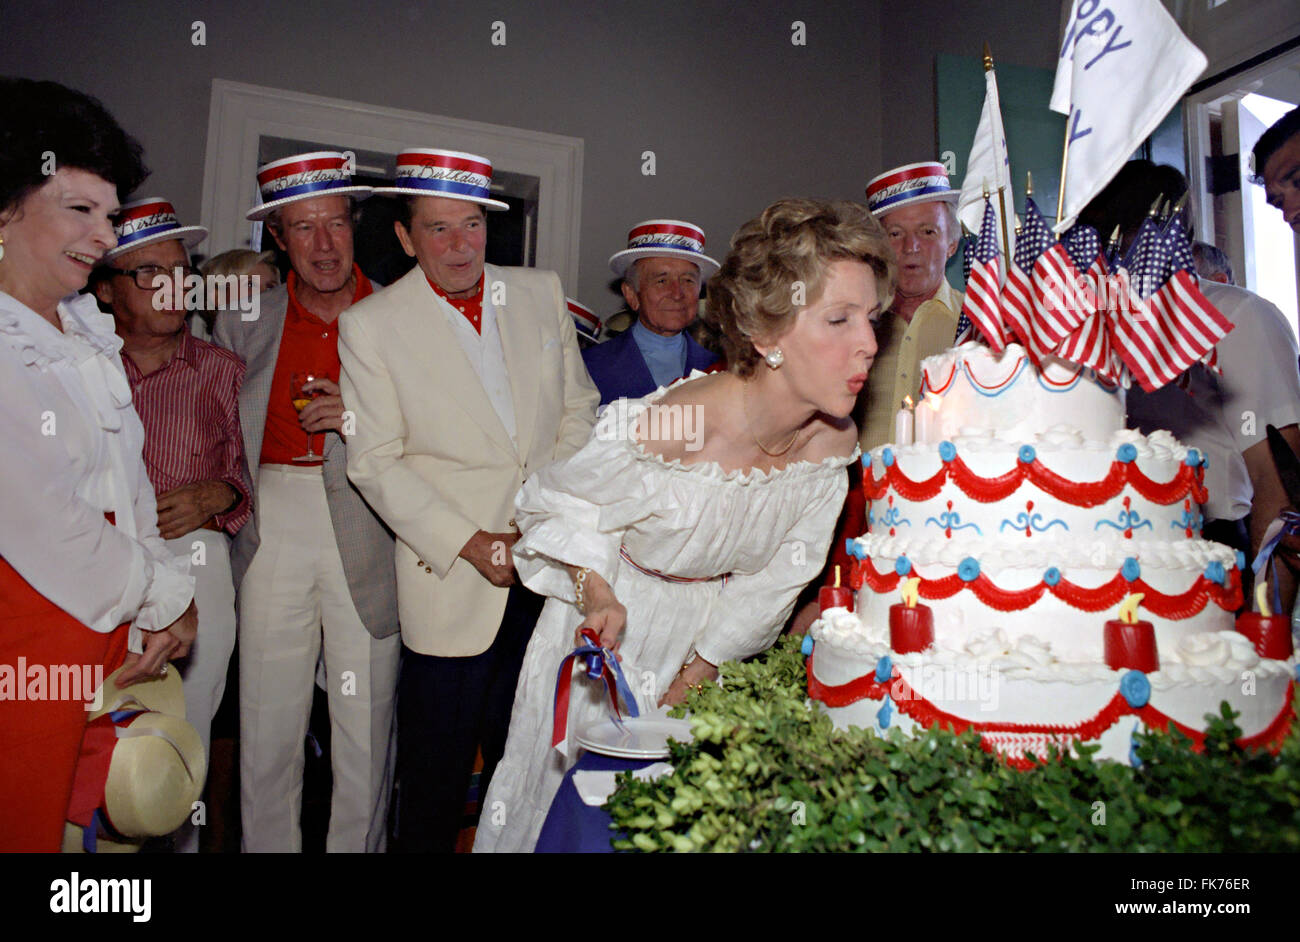 First Lady Nancy Reagan blowing out birthday candles during a party to celebrate Independence Day as President Ronald Reagan, Earle Jorgensen and William Wilson look on at Woodlawn Plantation July 4, 1981 in Mount Vernon Virginia. Stock Photo